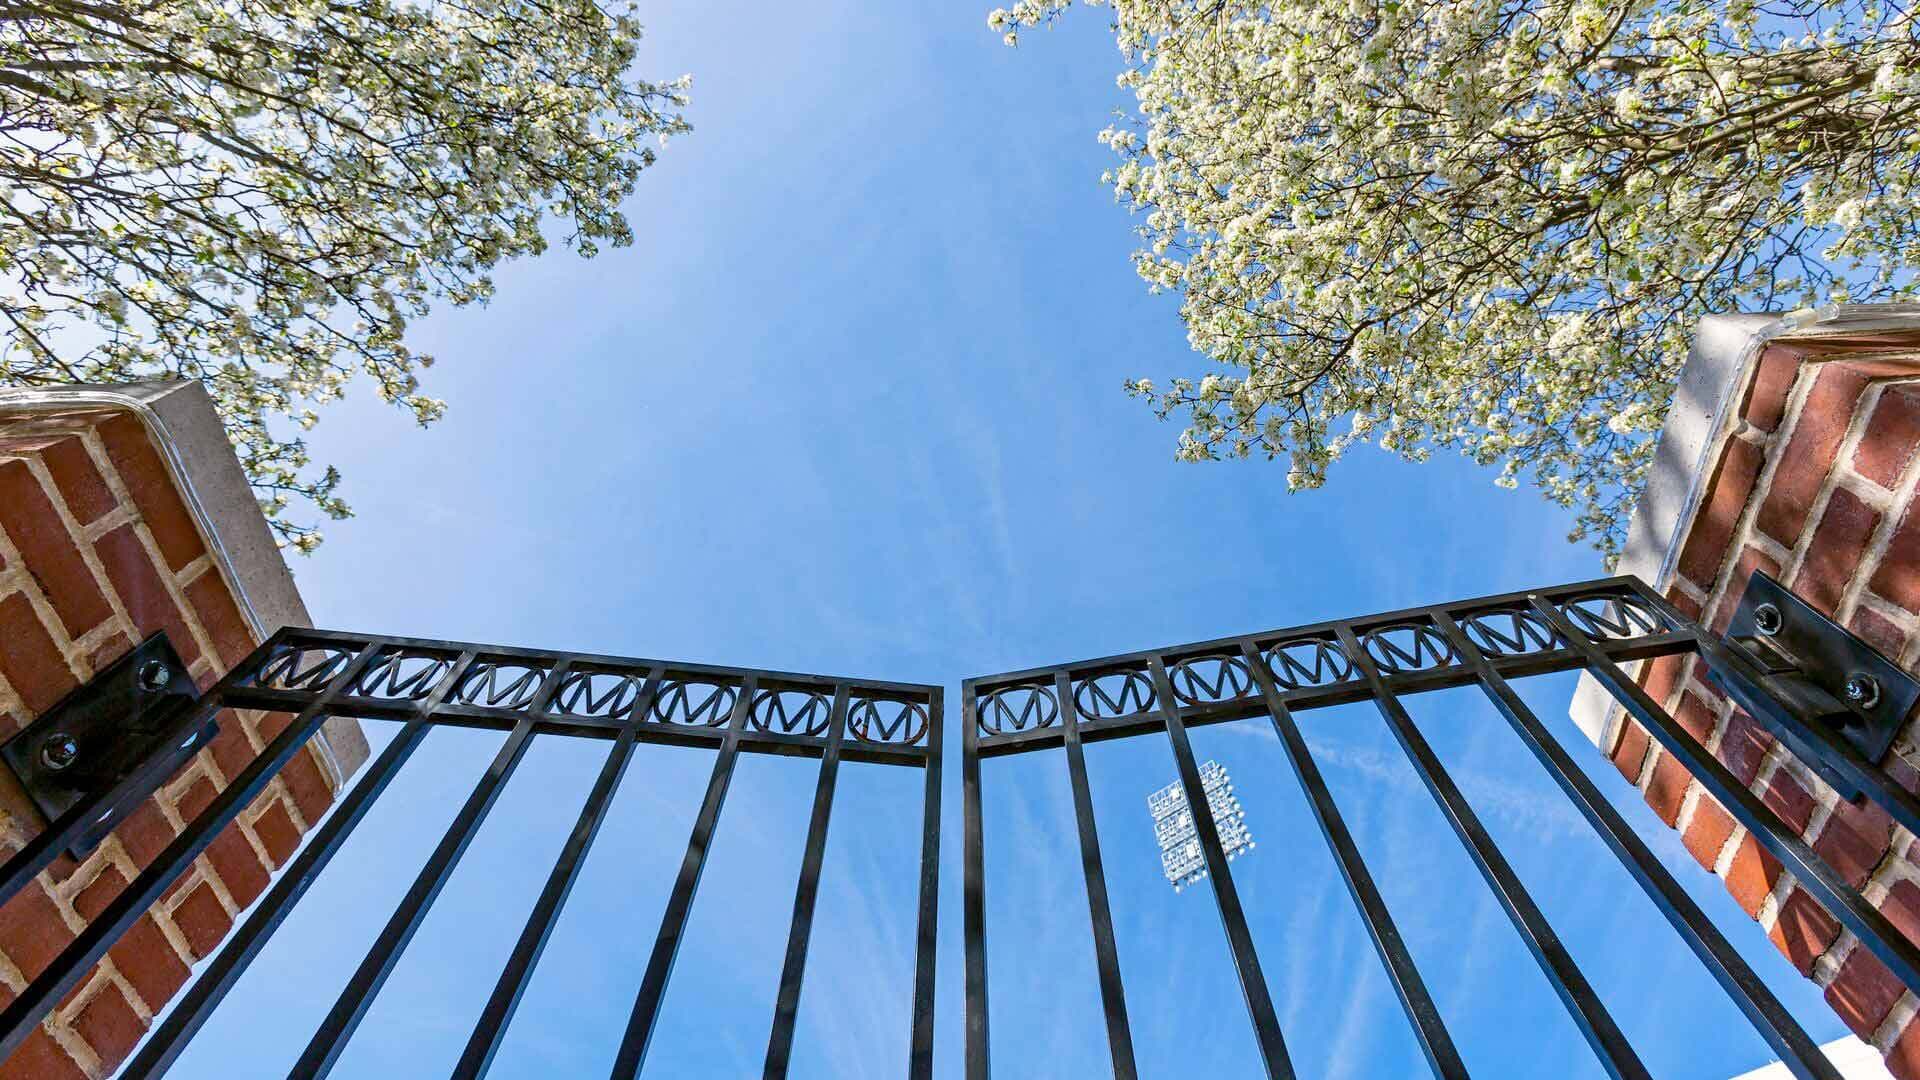 Gate with M's along top